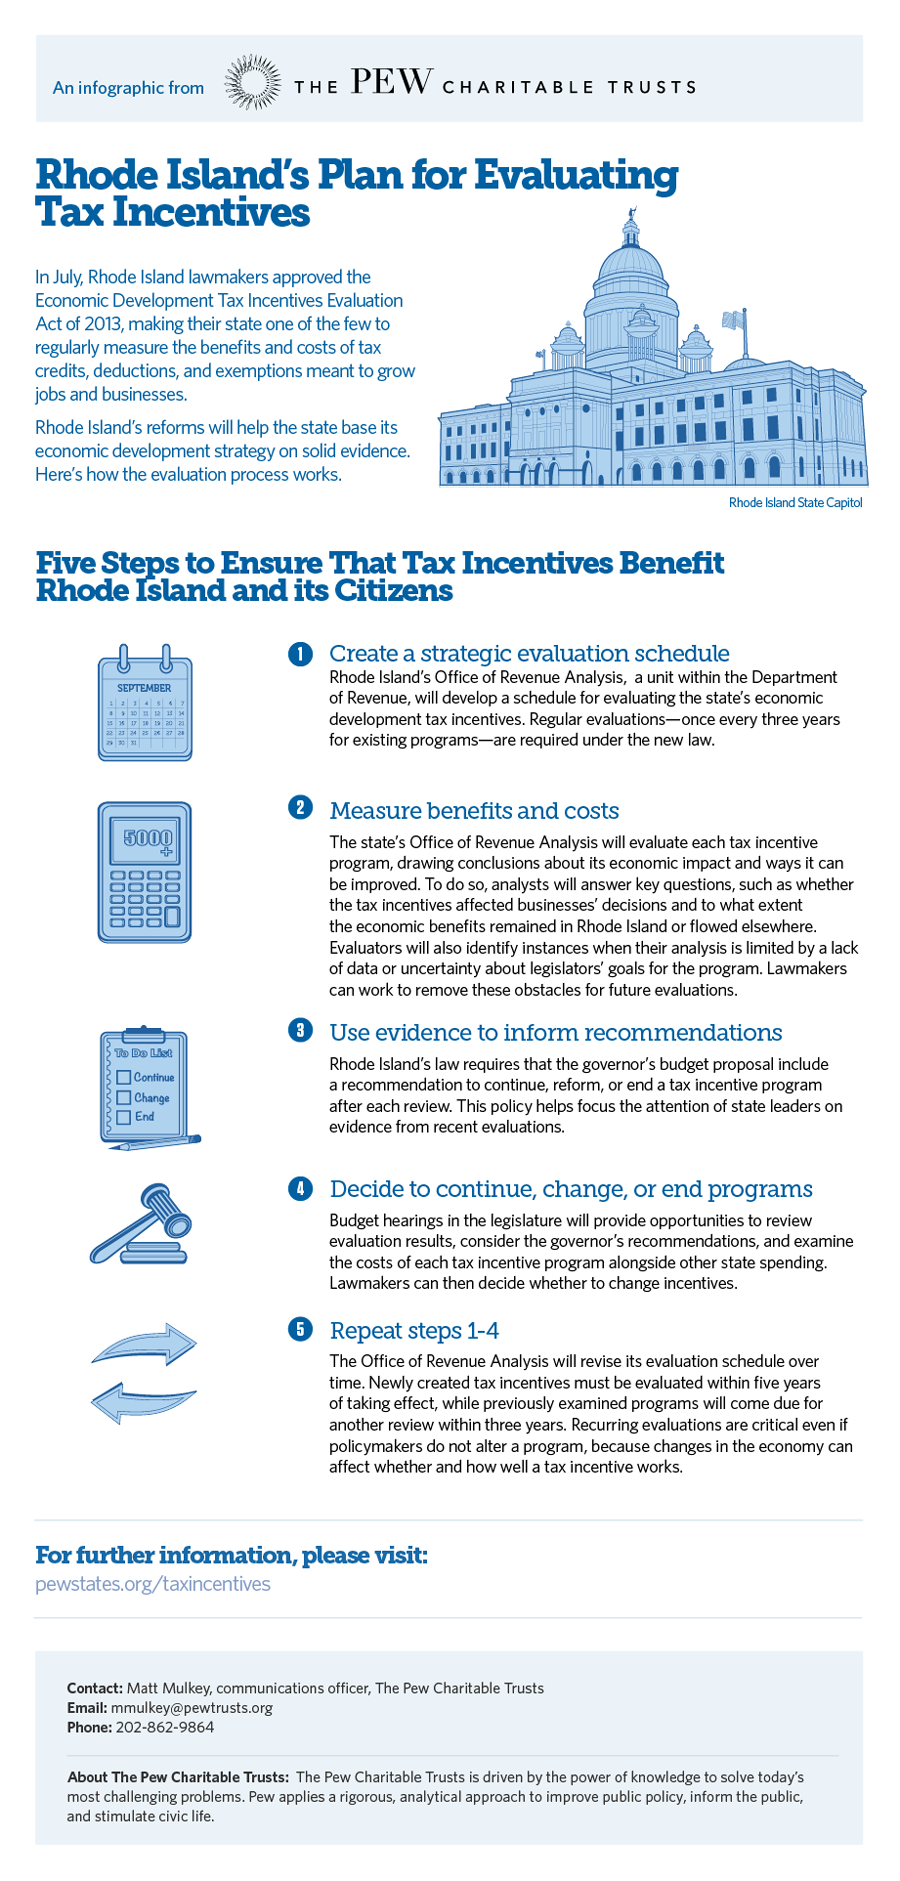 Rhode Island's Plan for Evaluating Tax Incentives